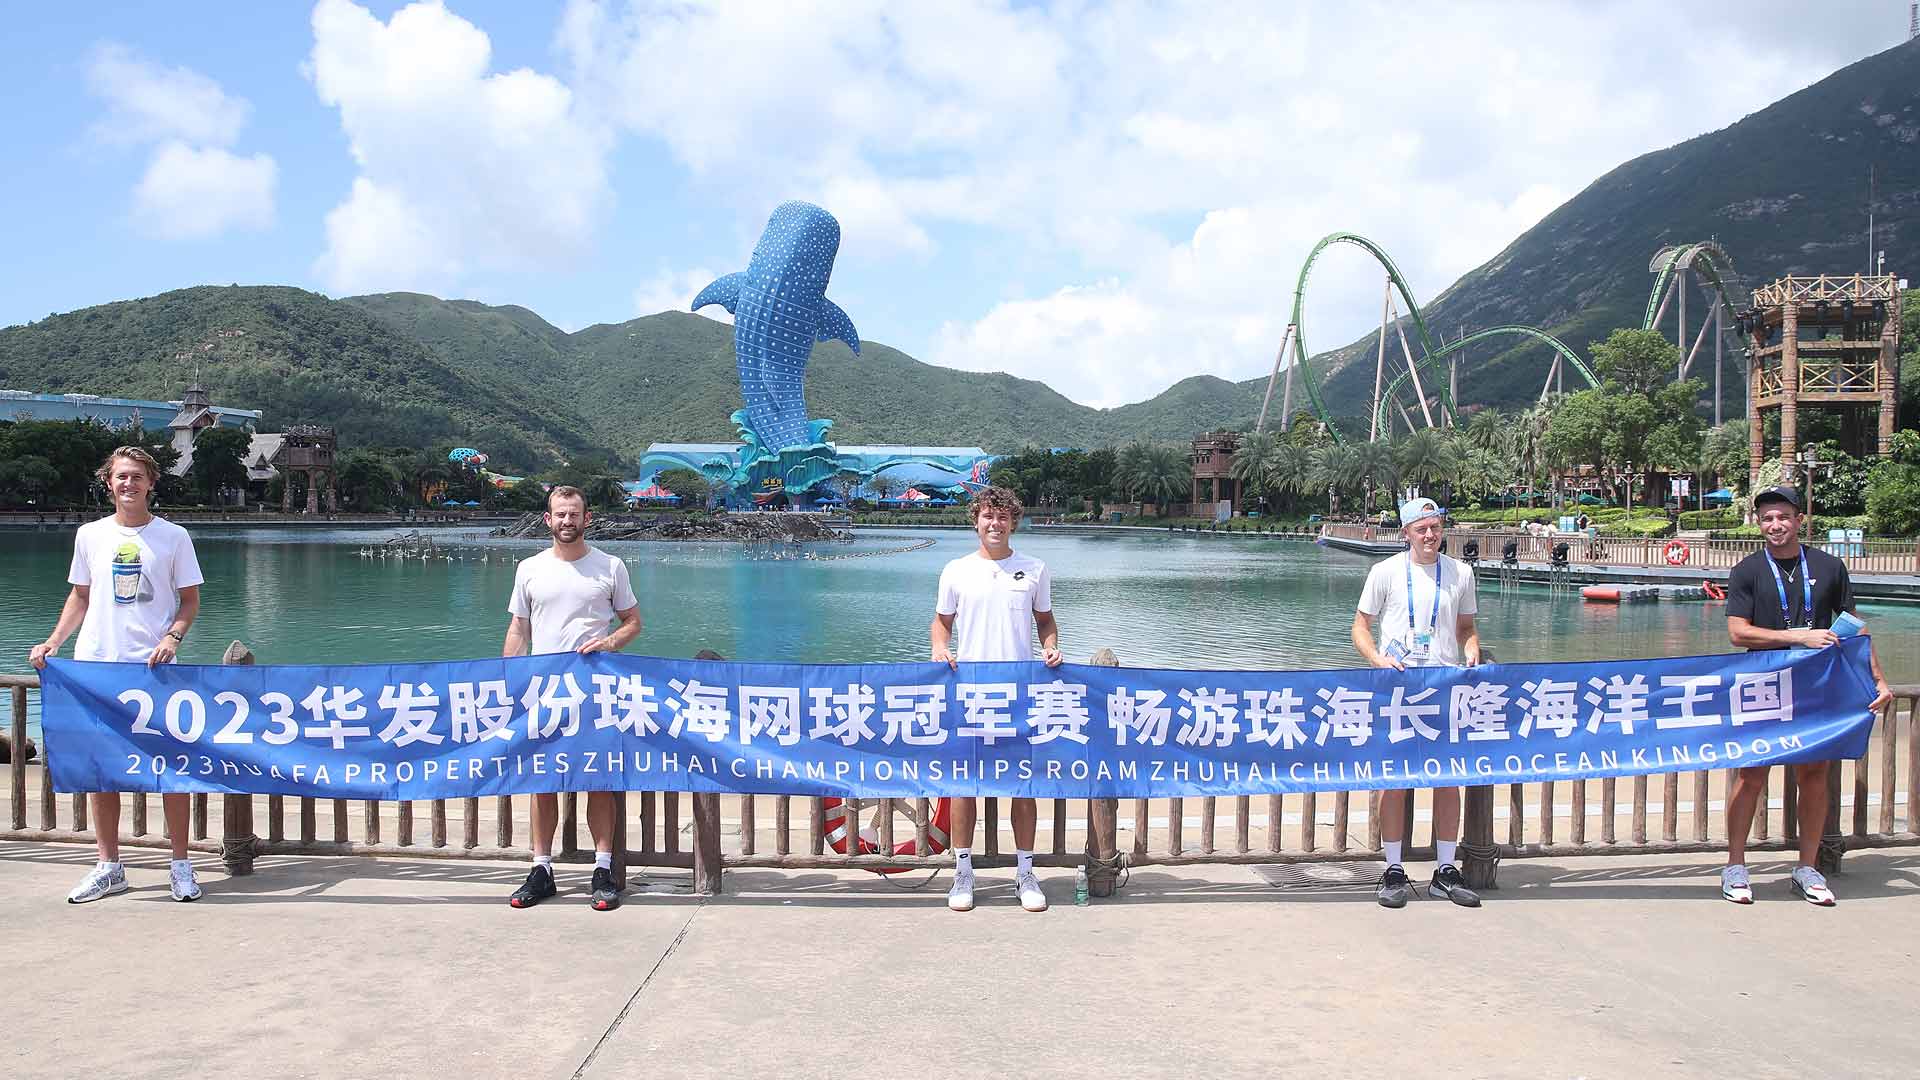 ATP Tour stars at the Chimelong Ocean Kingdom